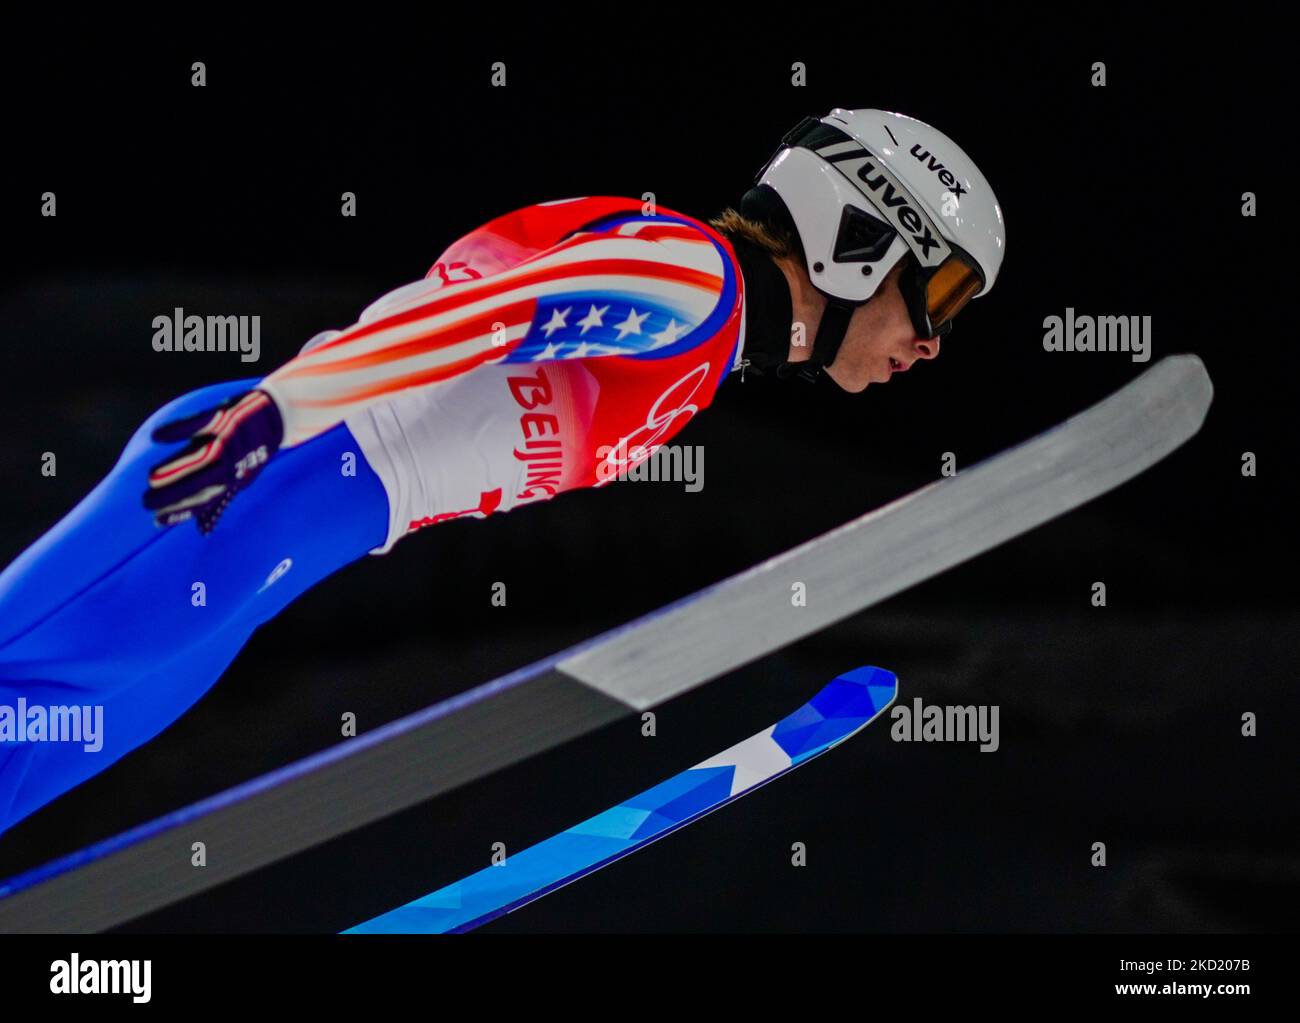 Gasienica Patrick from USA during Ski Jumping at the Beijing 2022 Winter Olympic Games at Zhangjiakou Genting Snow Park on February 6, 2022 in Zhangjiakou, China. (Photo by Ulrik Pedersen/NurPhoto) Stock Photo